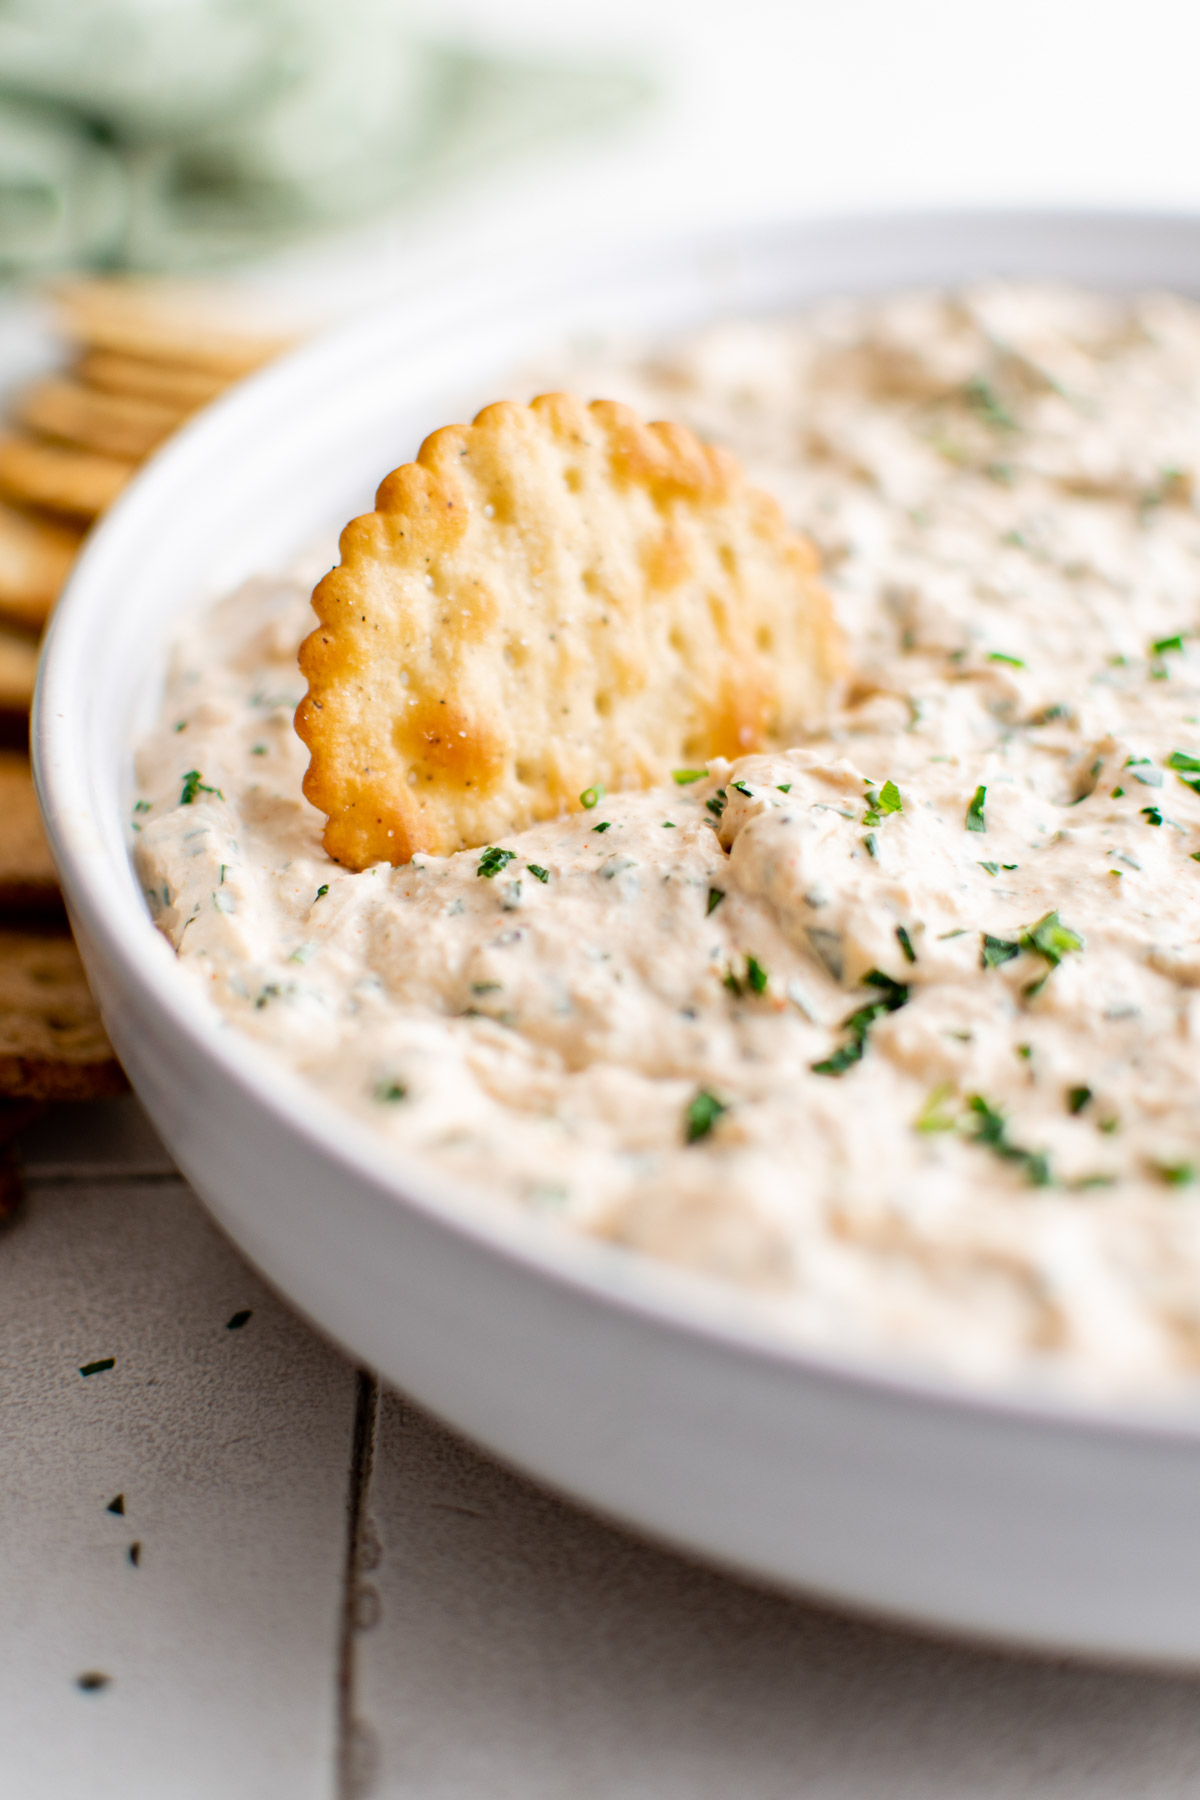 Tuna dip in a bowl with crackers.